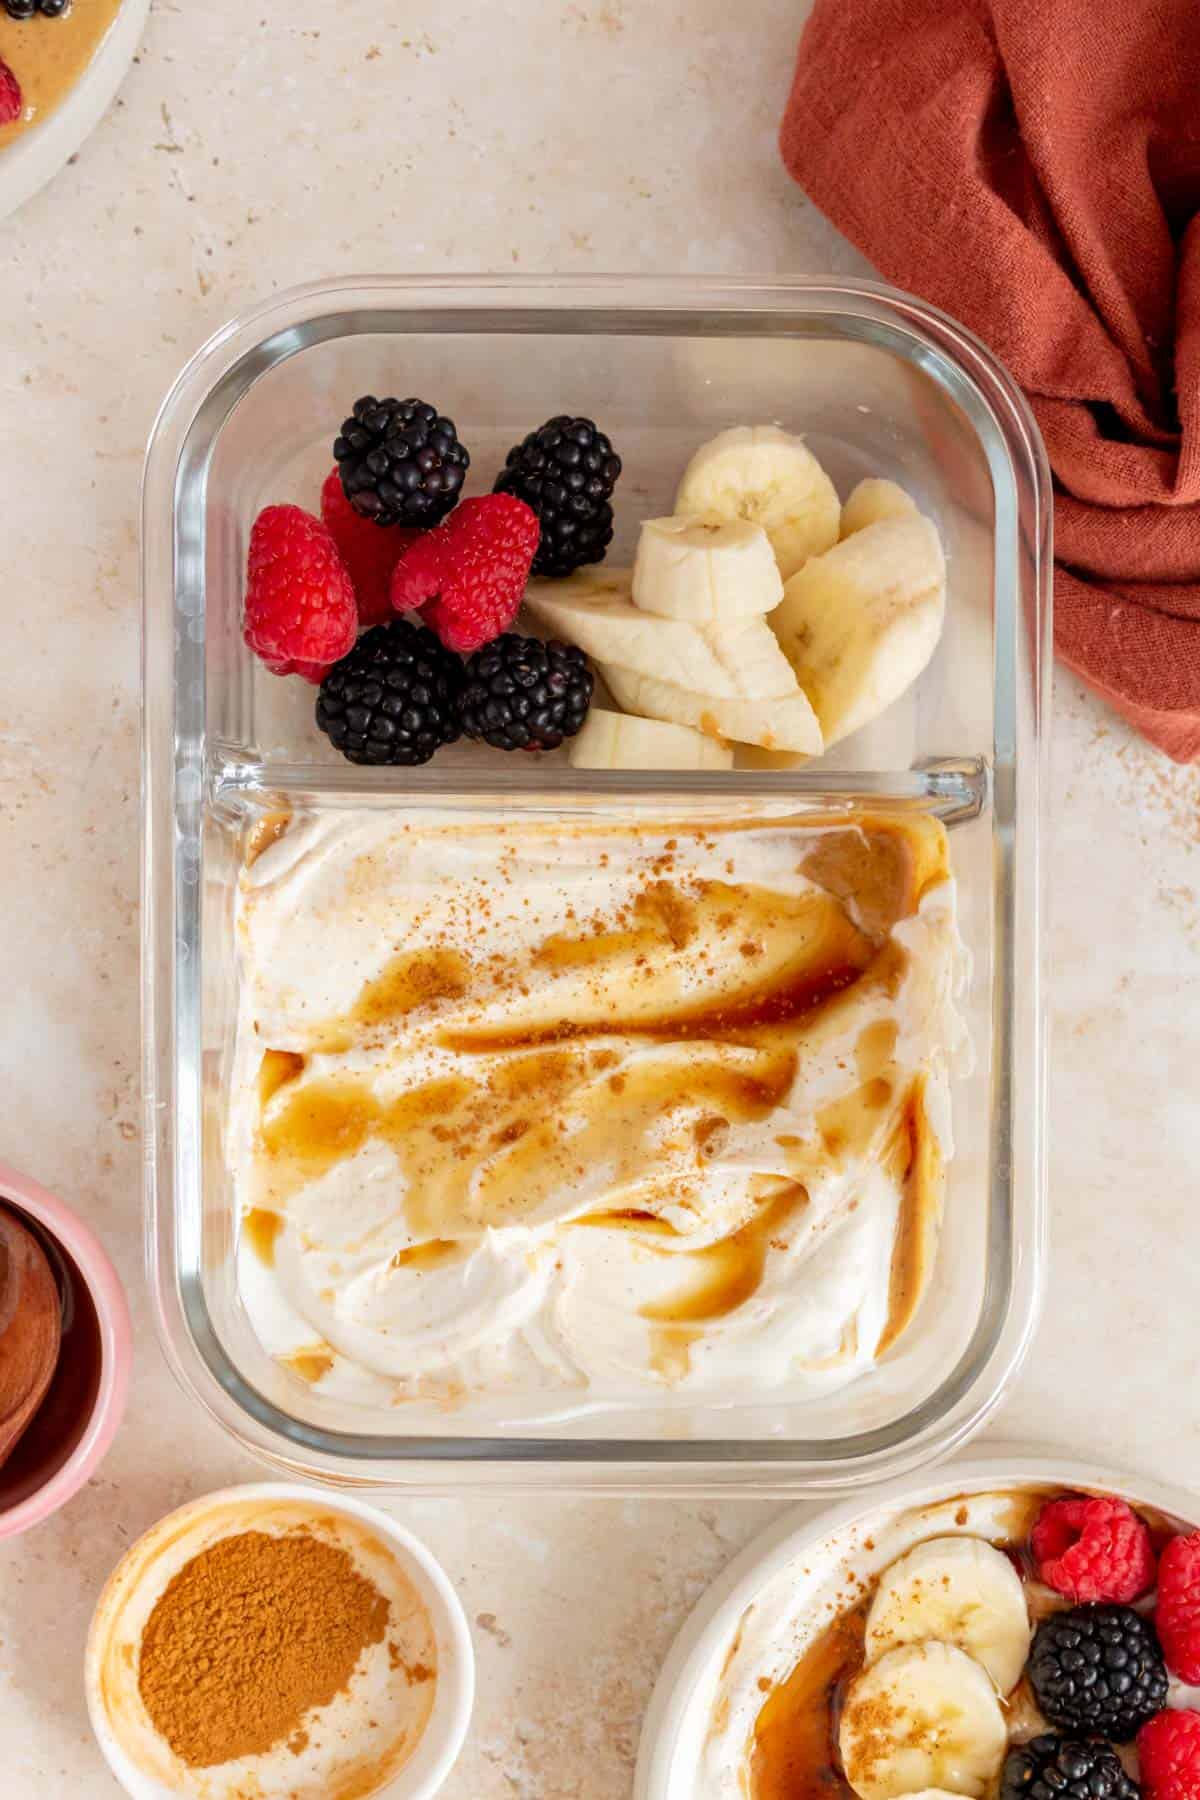 Greek yogurt peanut butter in a meal prep container along with berries and banana slices.